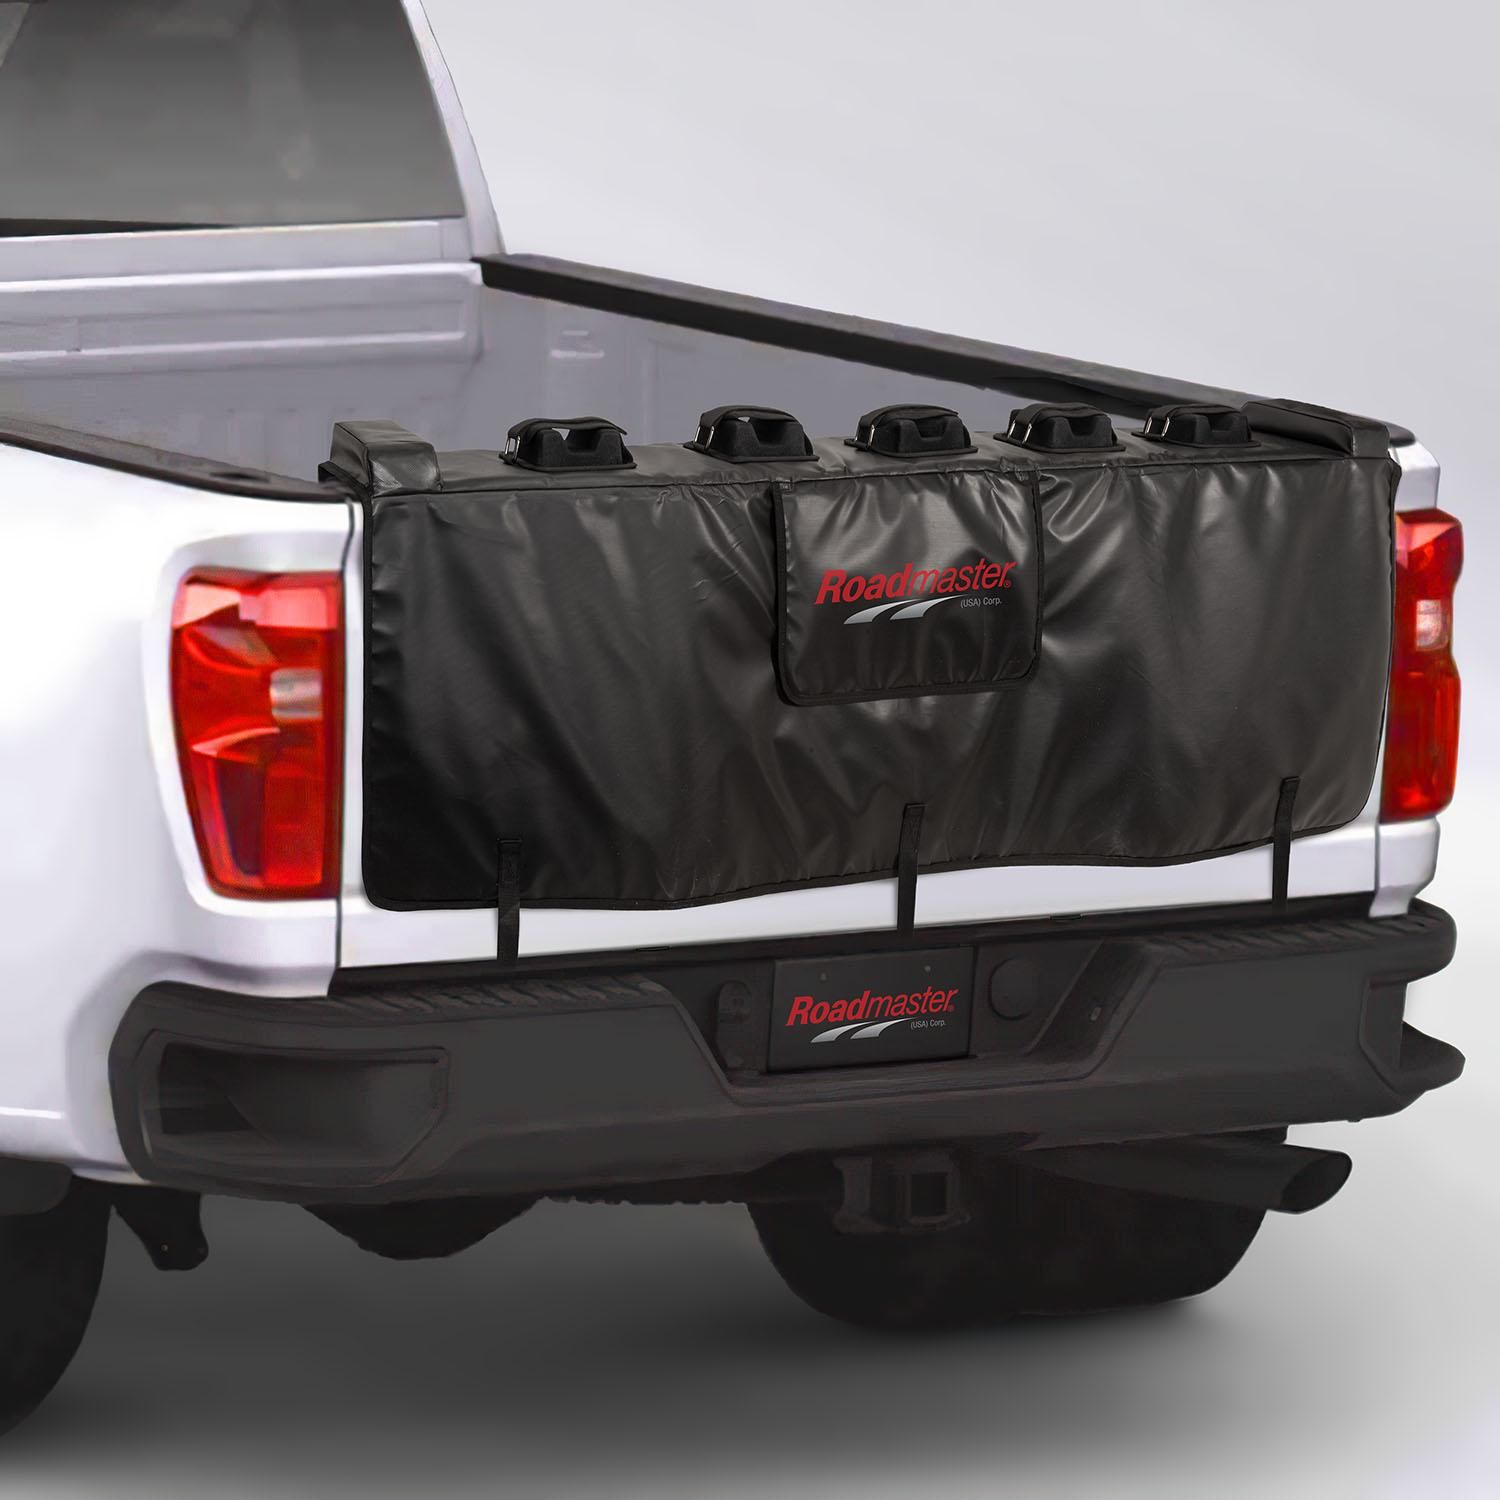 MiLife Bike Protective Pad for pickup Truck Tailgate